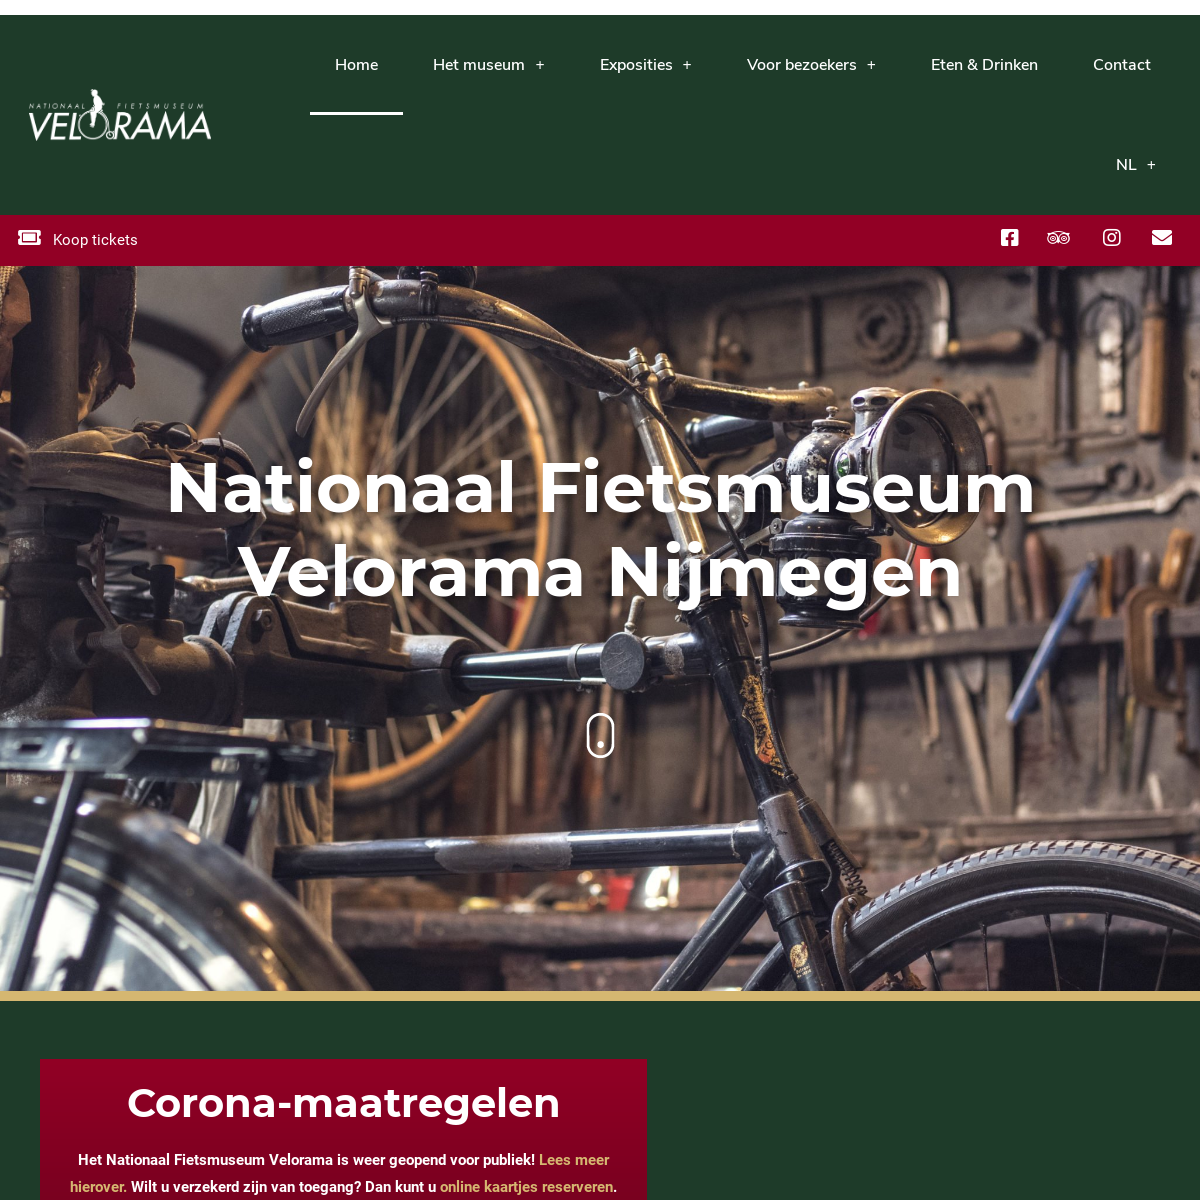 A complete backup of velorama.nl